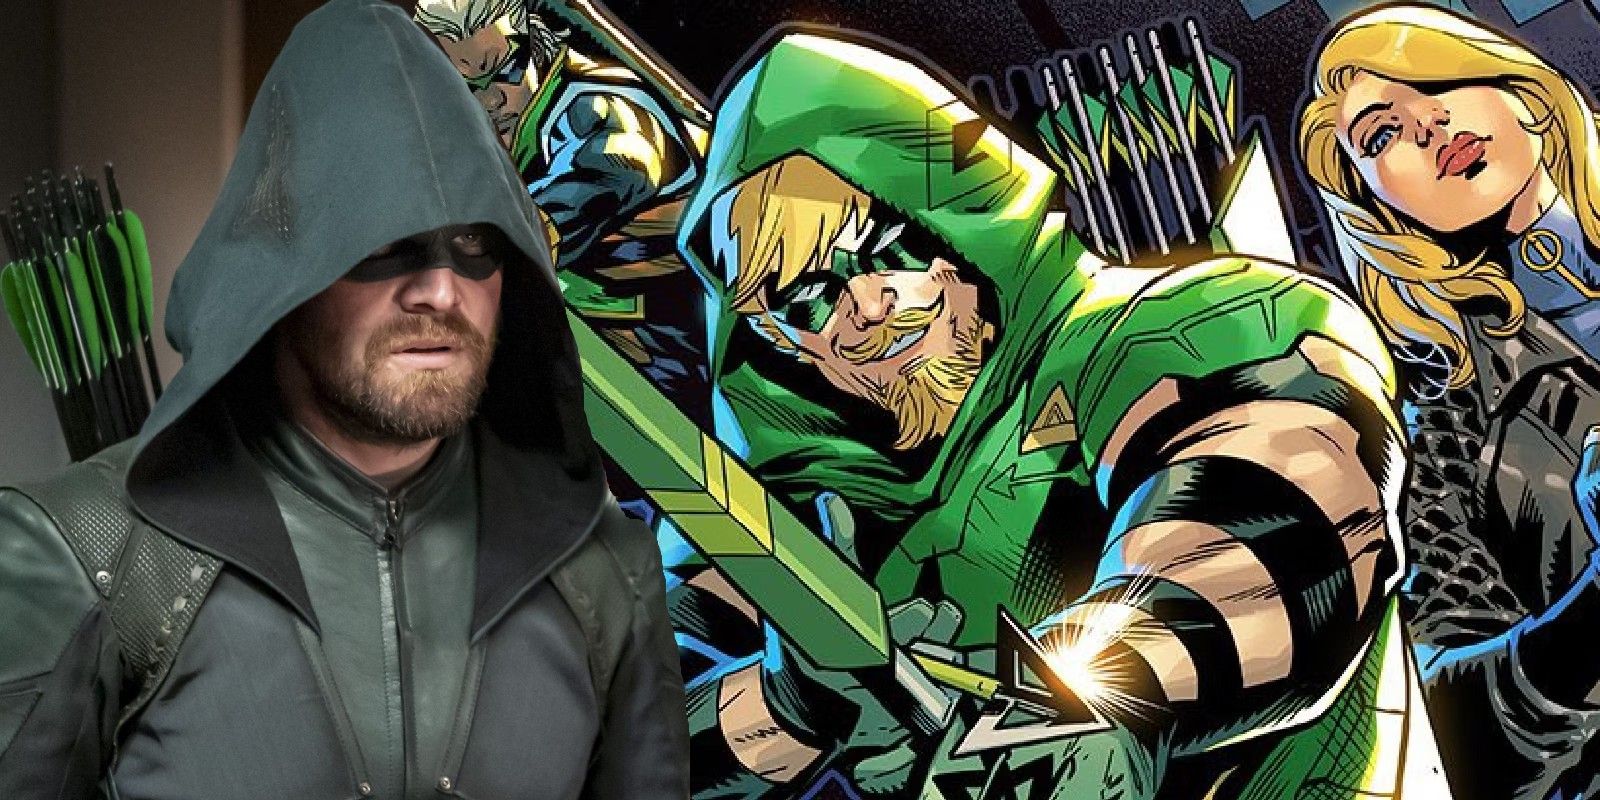 Green Arrow from DC Comics and the Stephen Amell as Green Arrow from the series Arrow